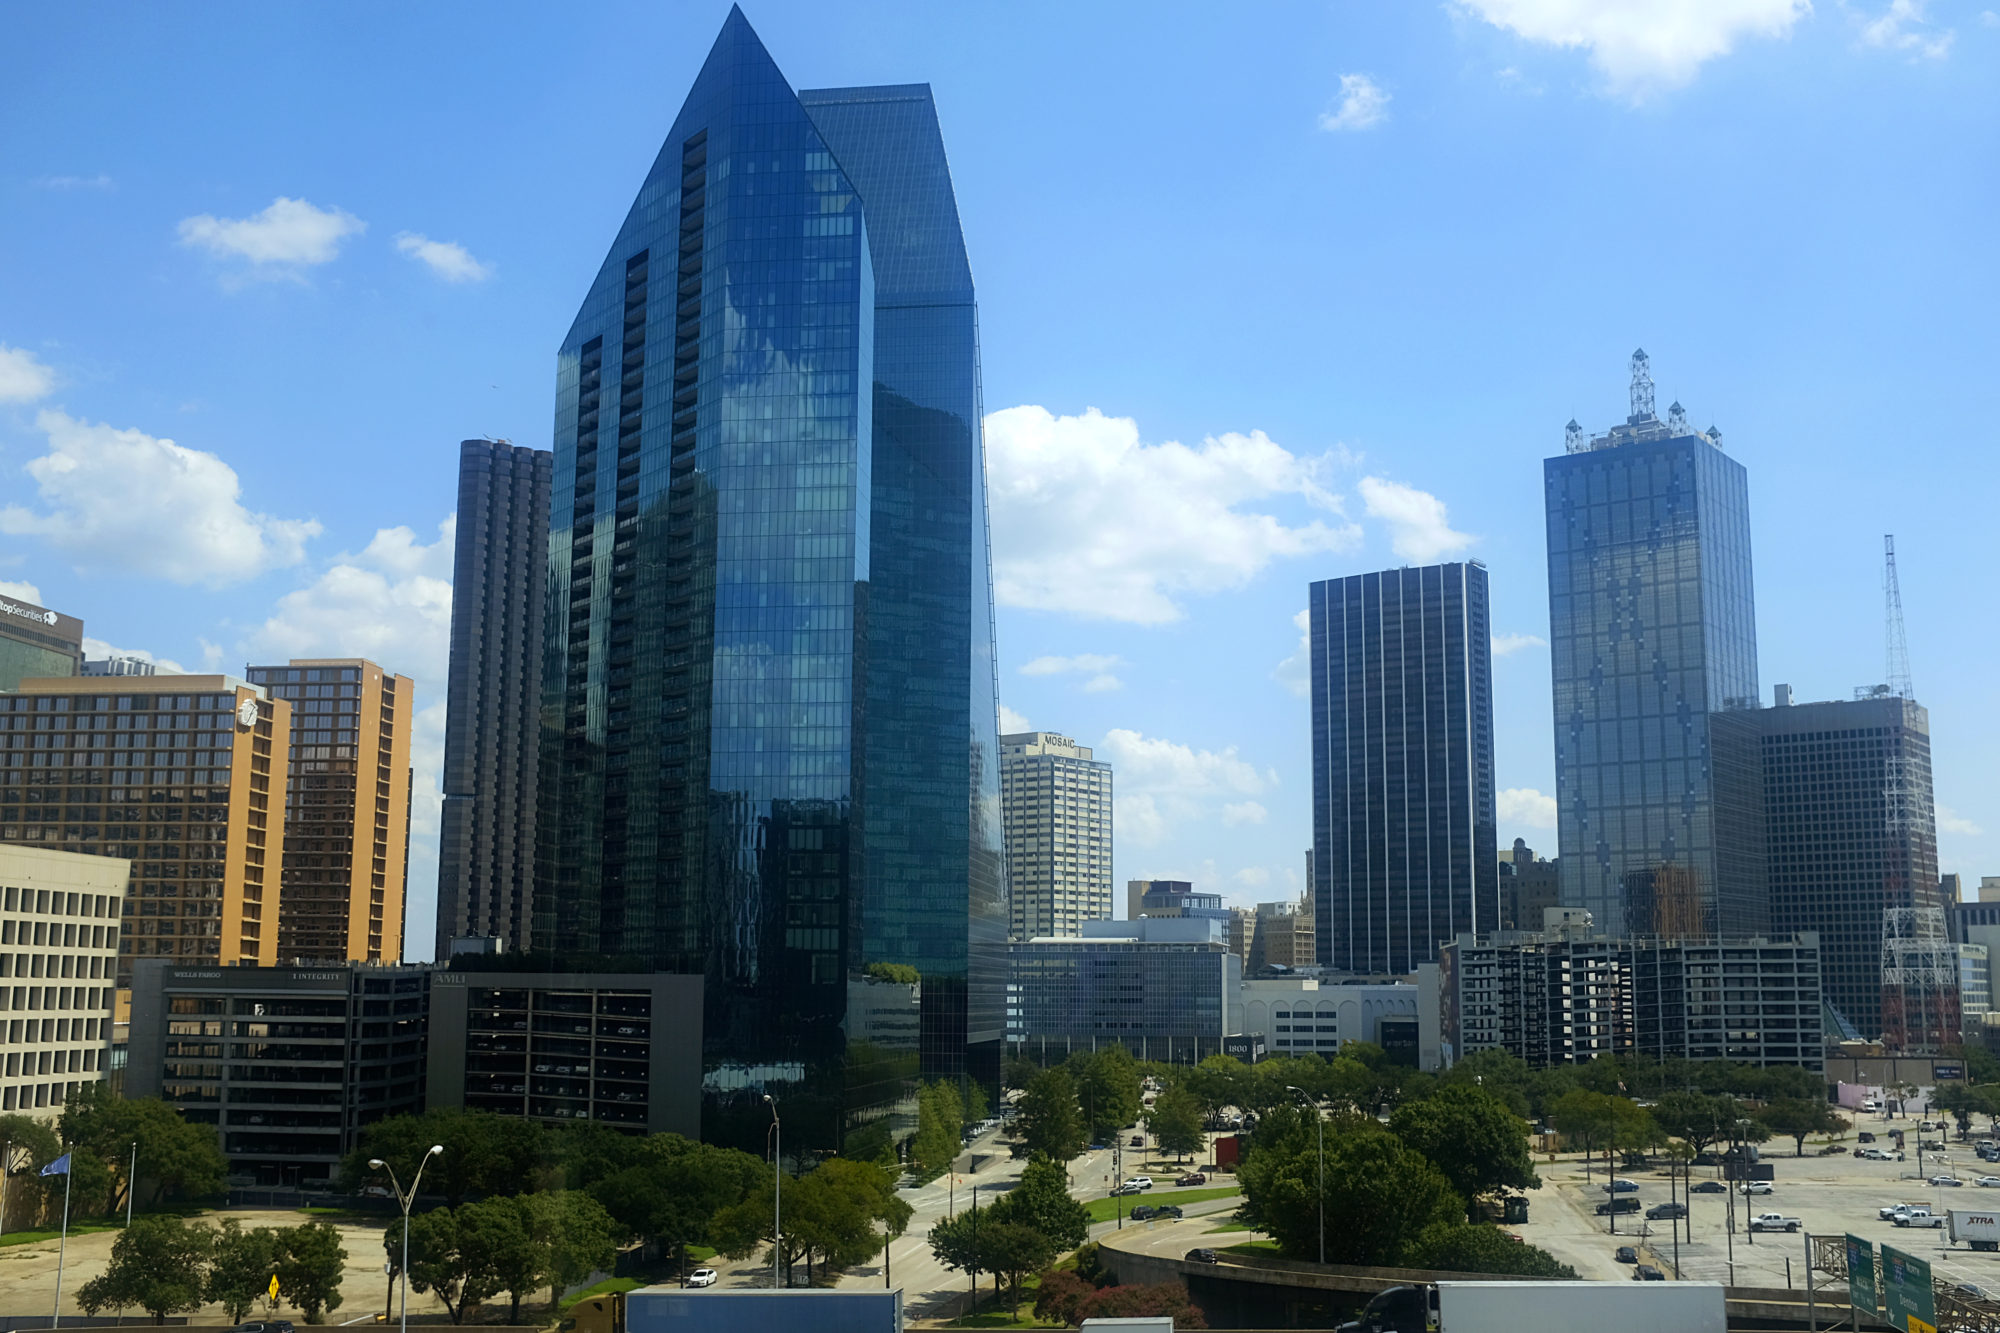 View of the Dallas skyline from the Perot Museum